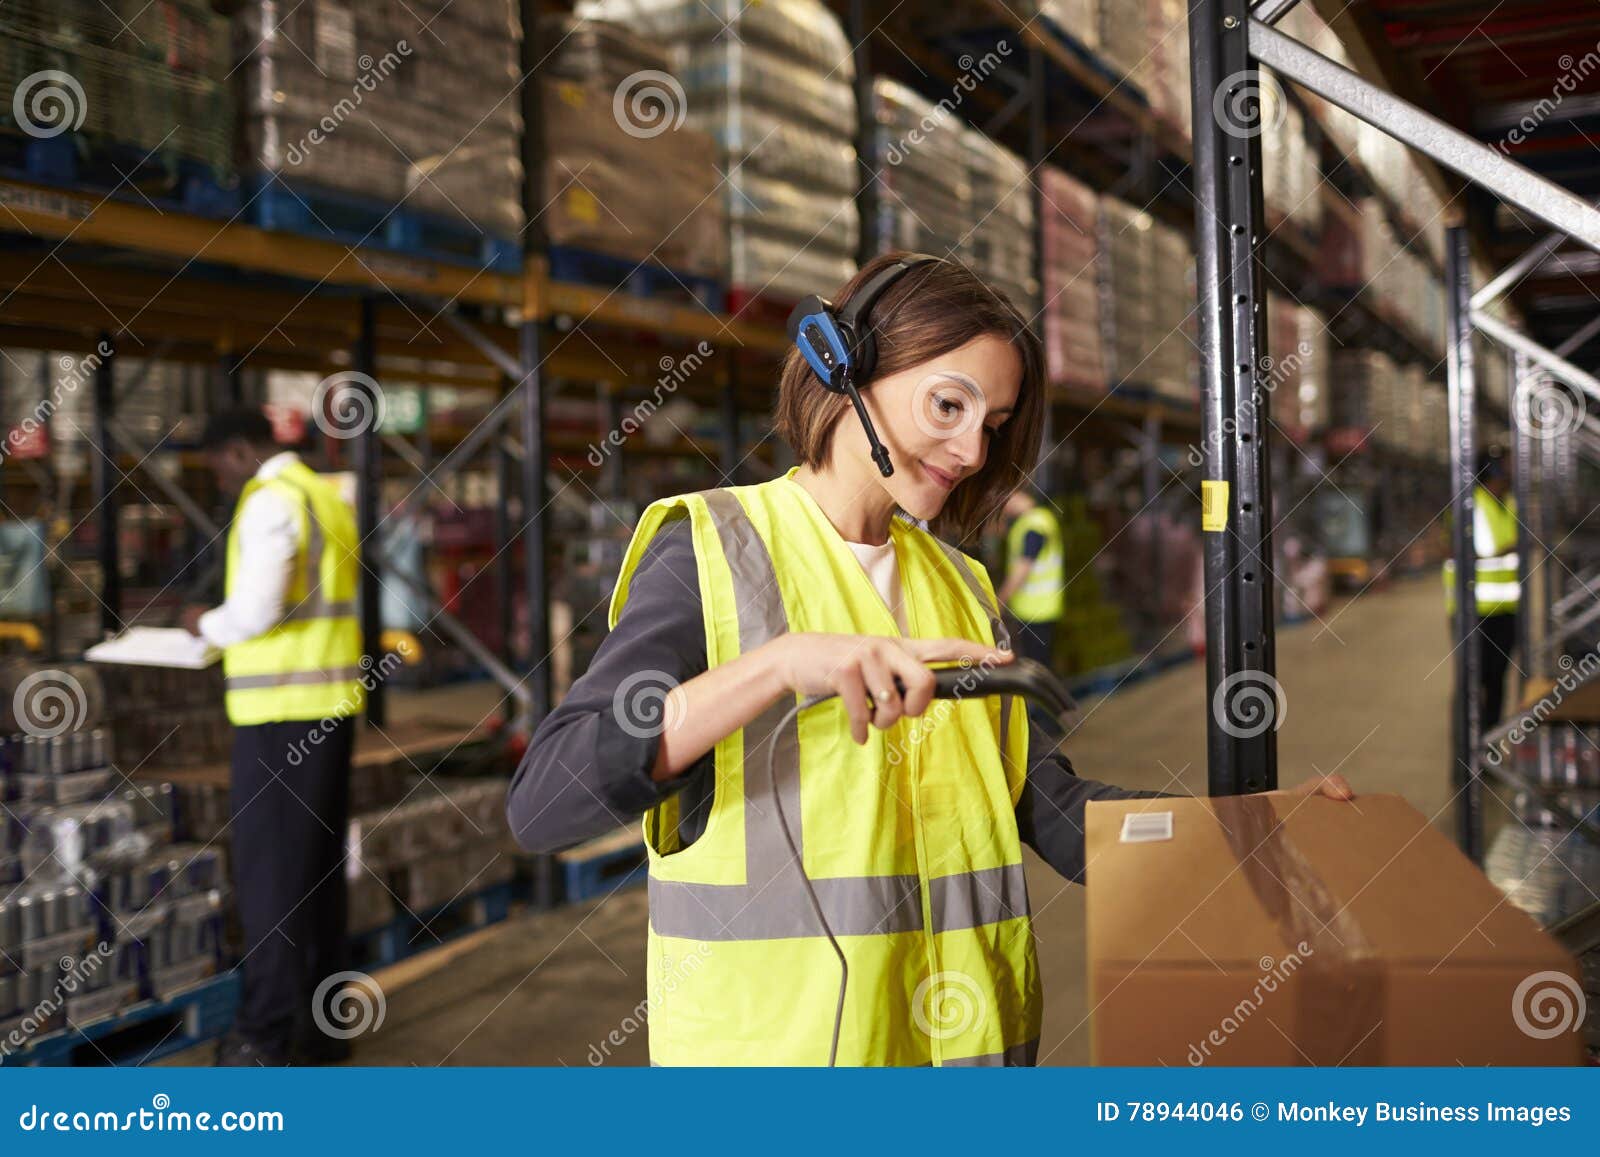 woman using a barcode reader in a distribution warehouse